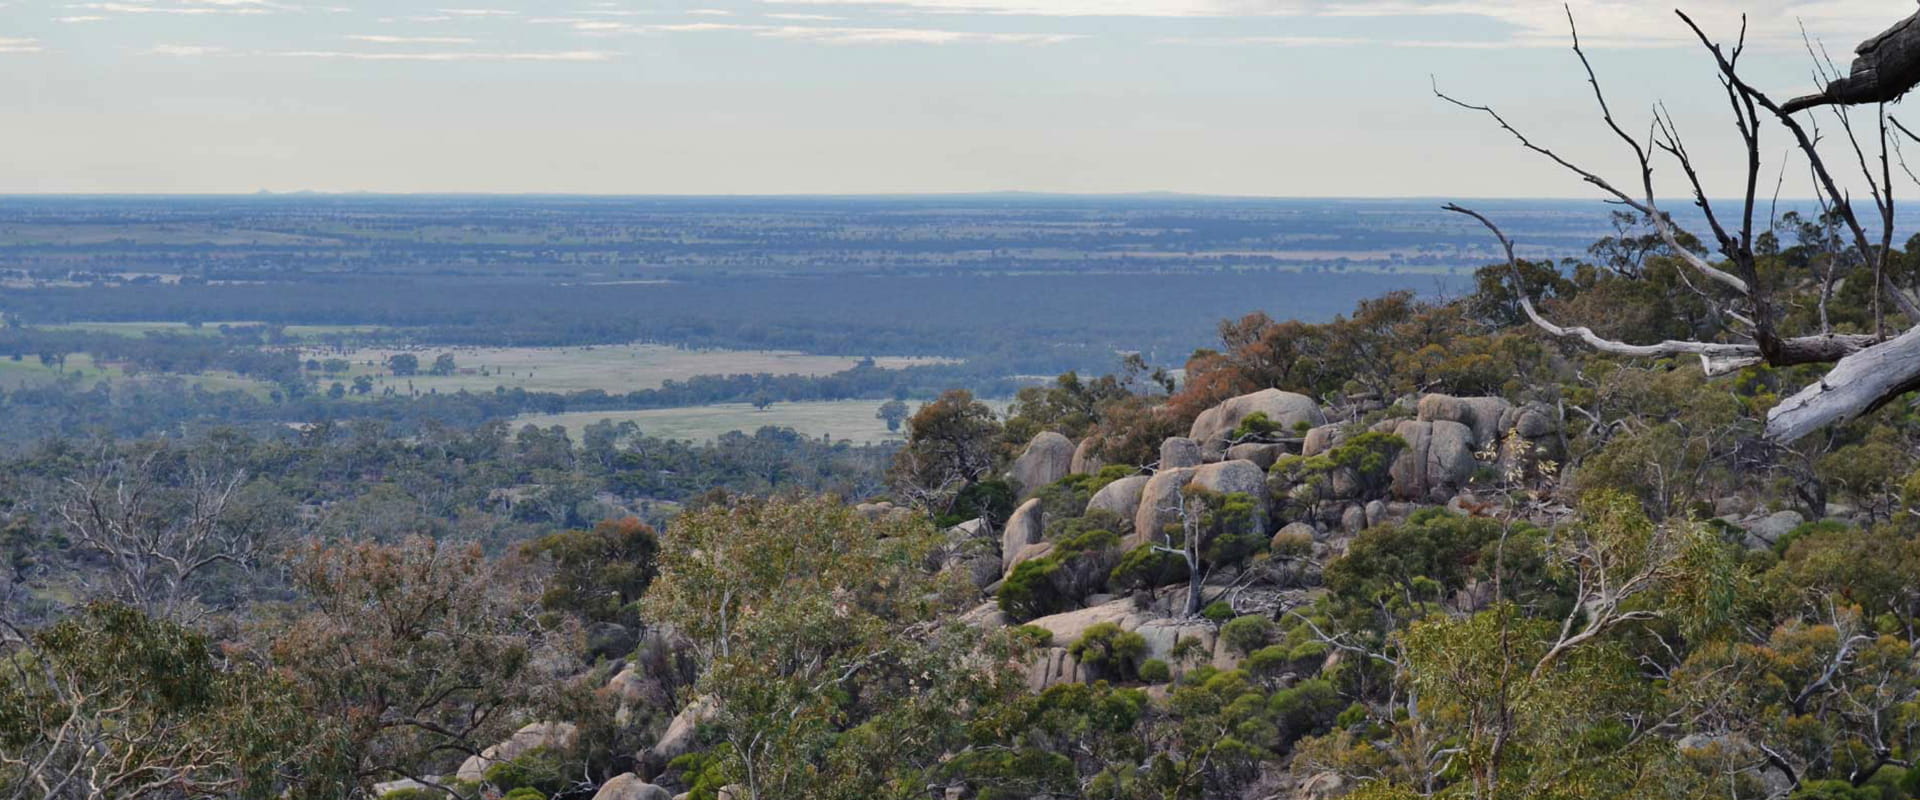 A view from a mountain top that overlooks the state park and large boulders on the mountain side.